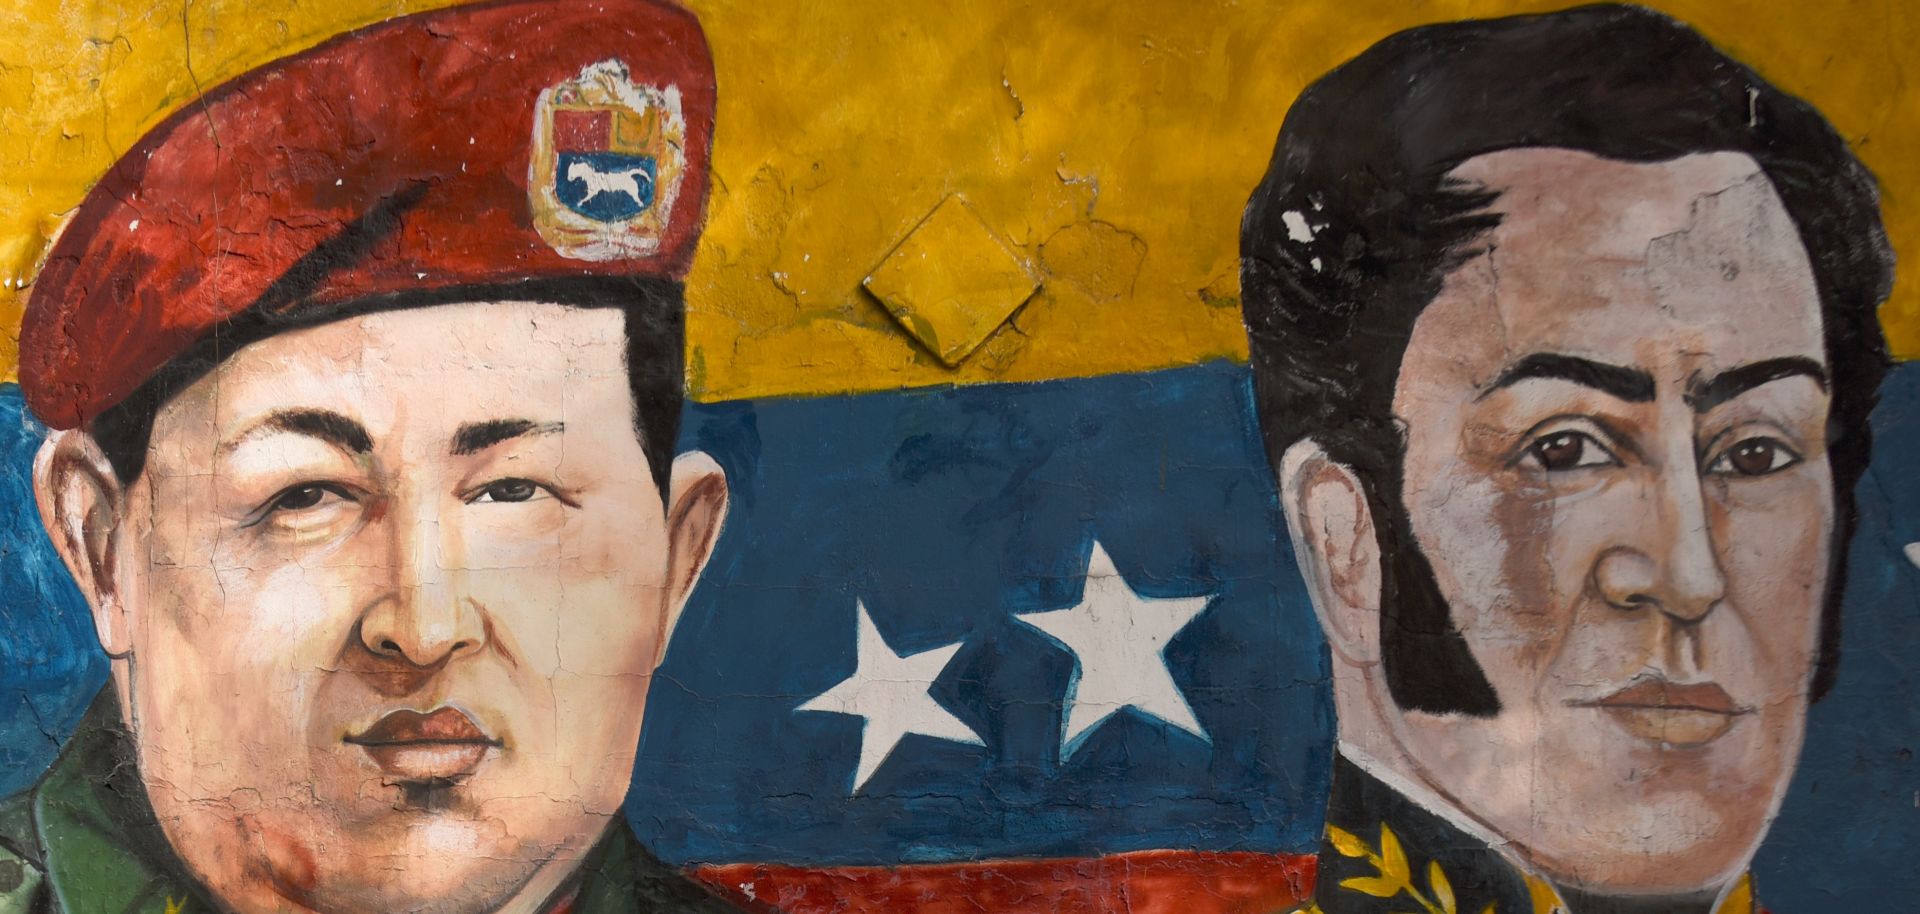 By understanding the underlying conditions that enabled the rise of strongmen like Argentina's Juan Domingo Peron or Venezuela's Hugo Chavez, we can more easily spot the early signs of populism flaring in the region once again.